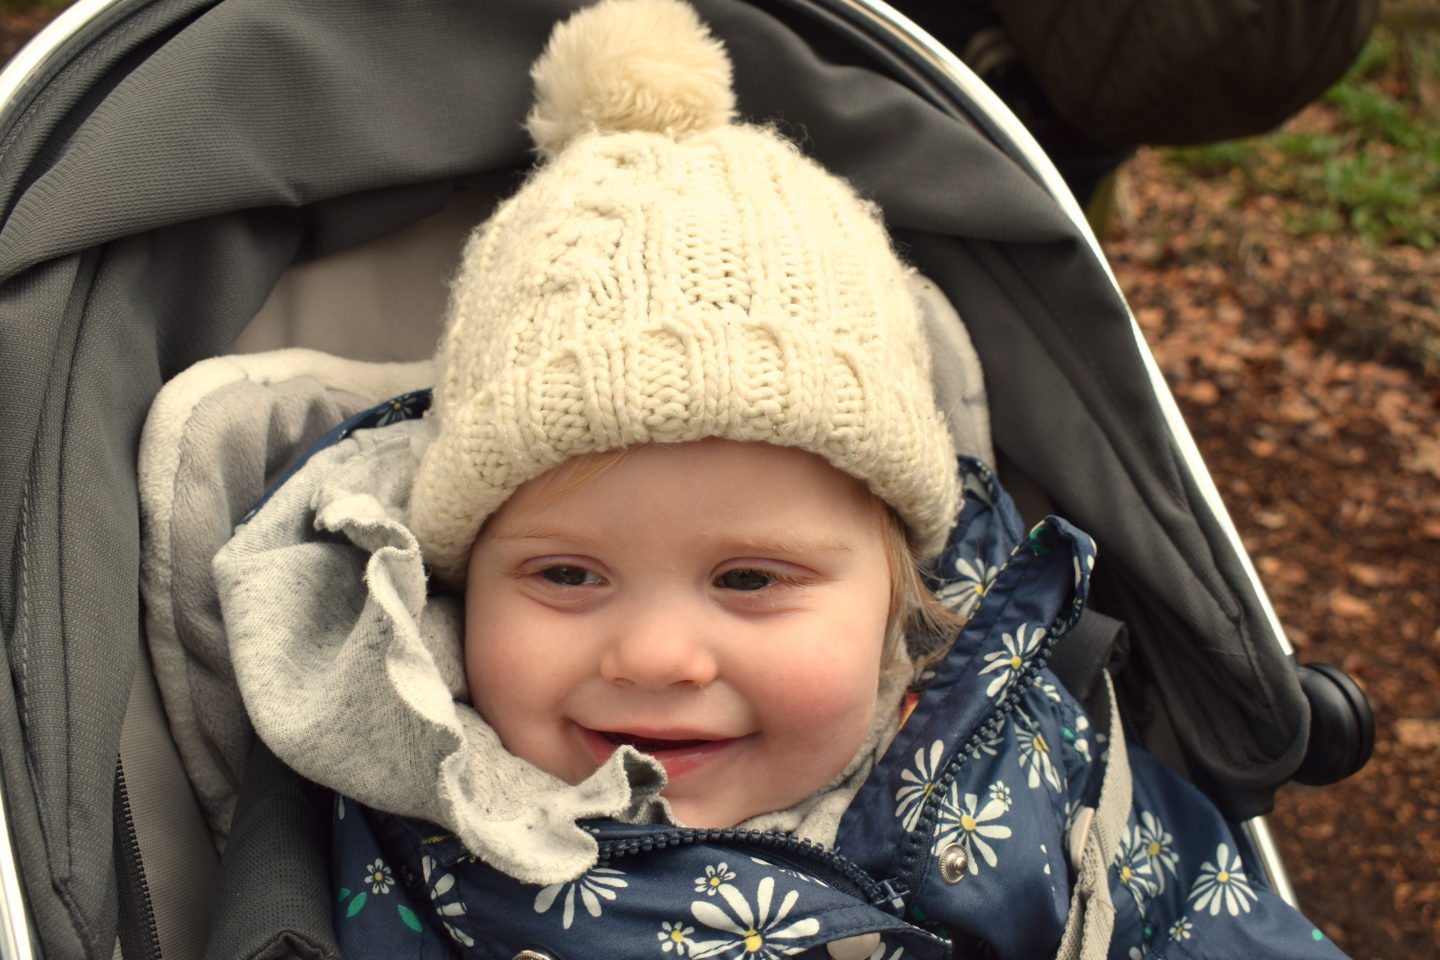 14 months old girl with bobble hat, sitting in pram, smiling